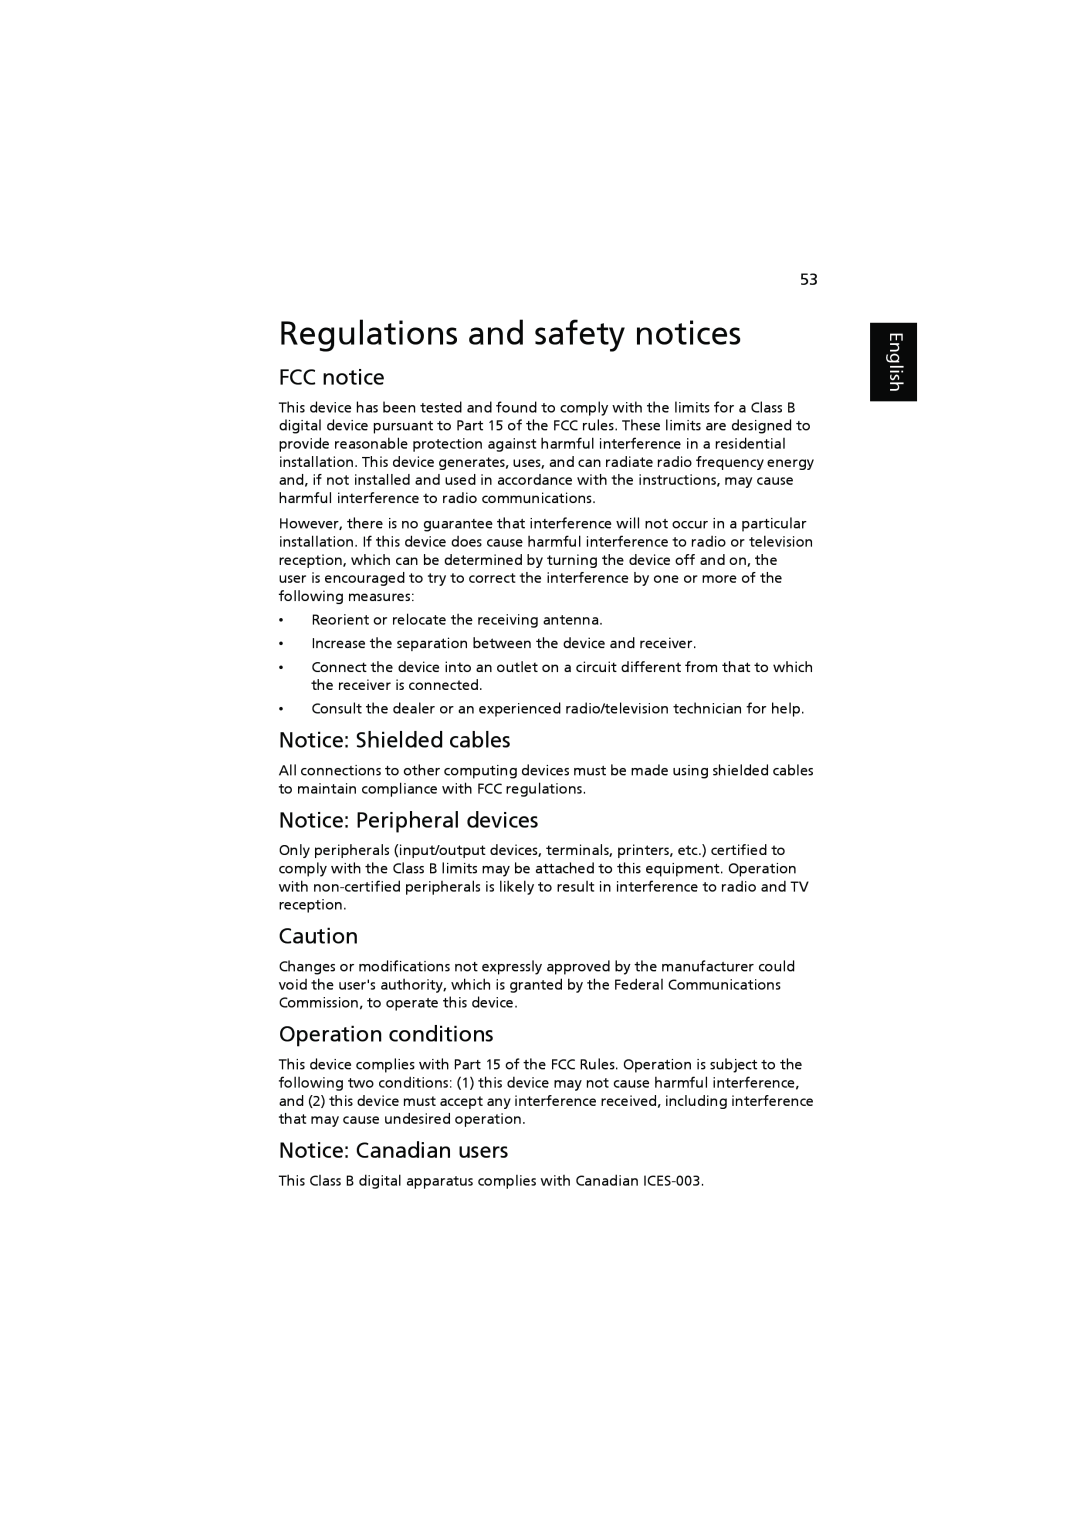 Acer P5390W, P5290 Regulations and safety notices, FCC notice, Notice Shielded cables, Notice Peripheral devices, English 